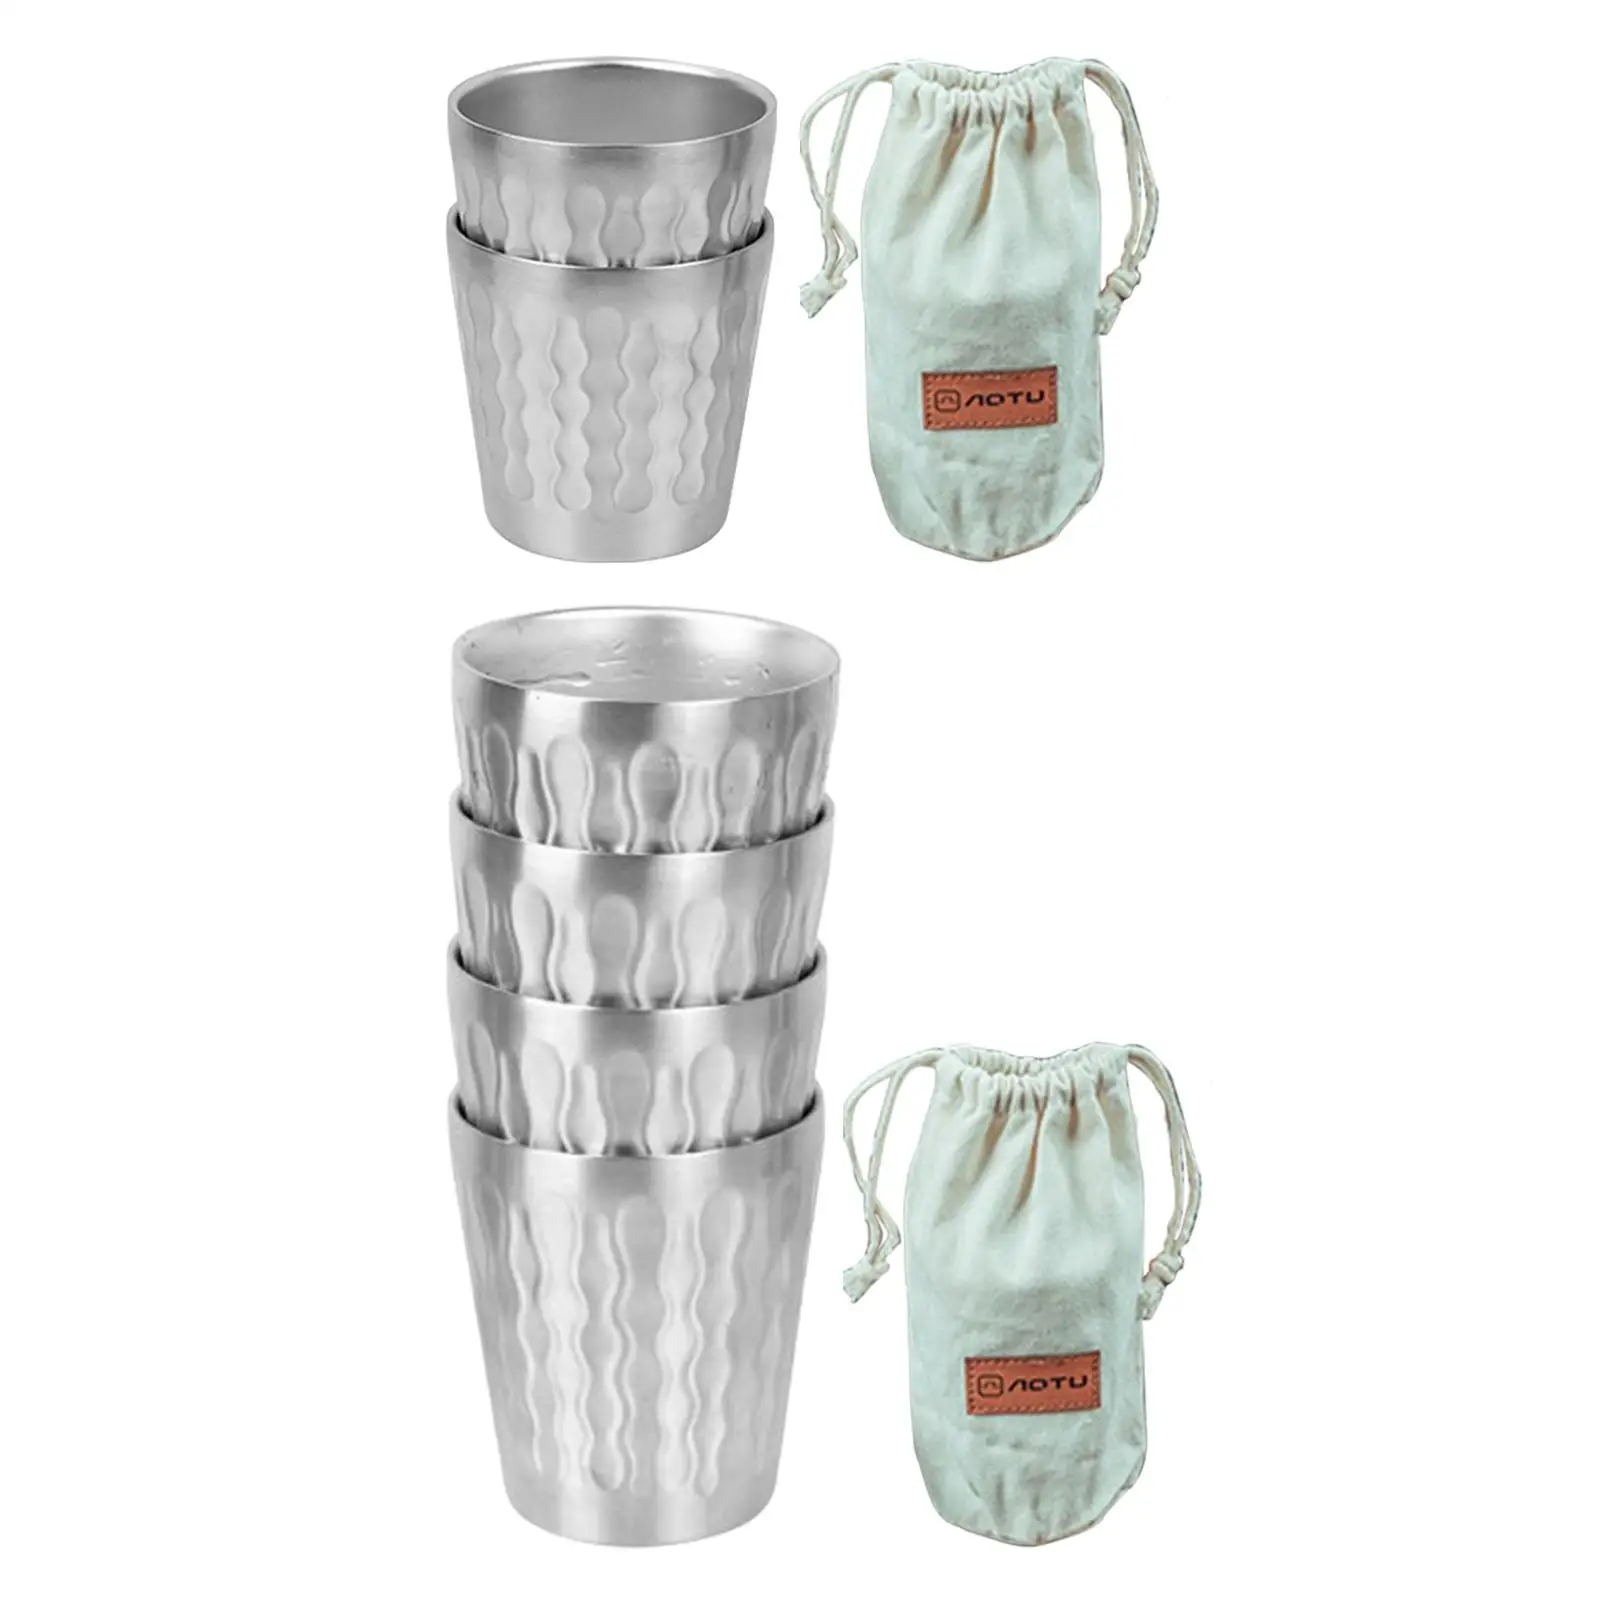 Stainless Steel Drinking Cups Double Wall Tumbler ,Coffee Cup Non Slip Bottom for Hot or Cold Beverages